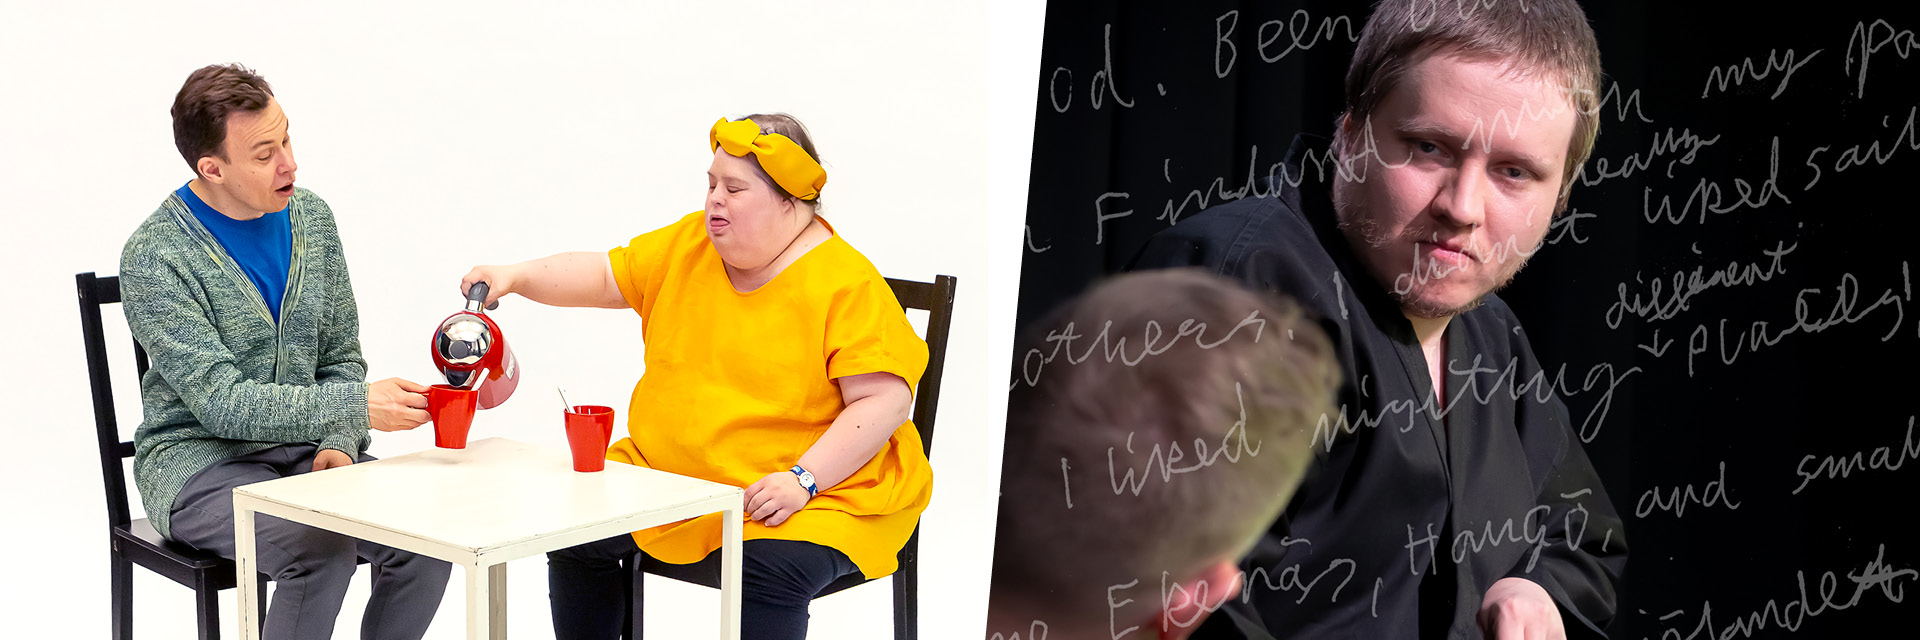 The header image is divided into two parts. In the left-hand image, the Vardag performance is advertised, featuring dancer Carl Knif and DuvTeatern actor Pia Renes enjoying a tea moment while sitting at a table. The right-hand image represents the Sense of Hope performance, where DuvTeatern dancer Emil Nordman looks sternly at his dance partner against a black background. The latter image is adorned with faint excerpts from a handwritten diary.